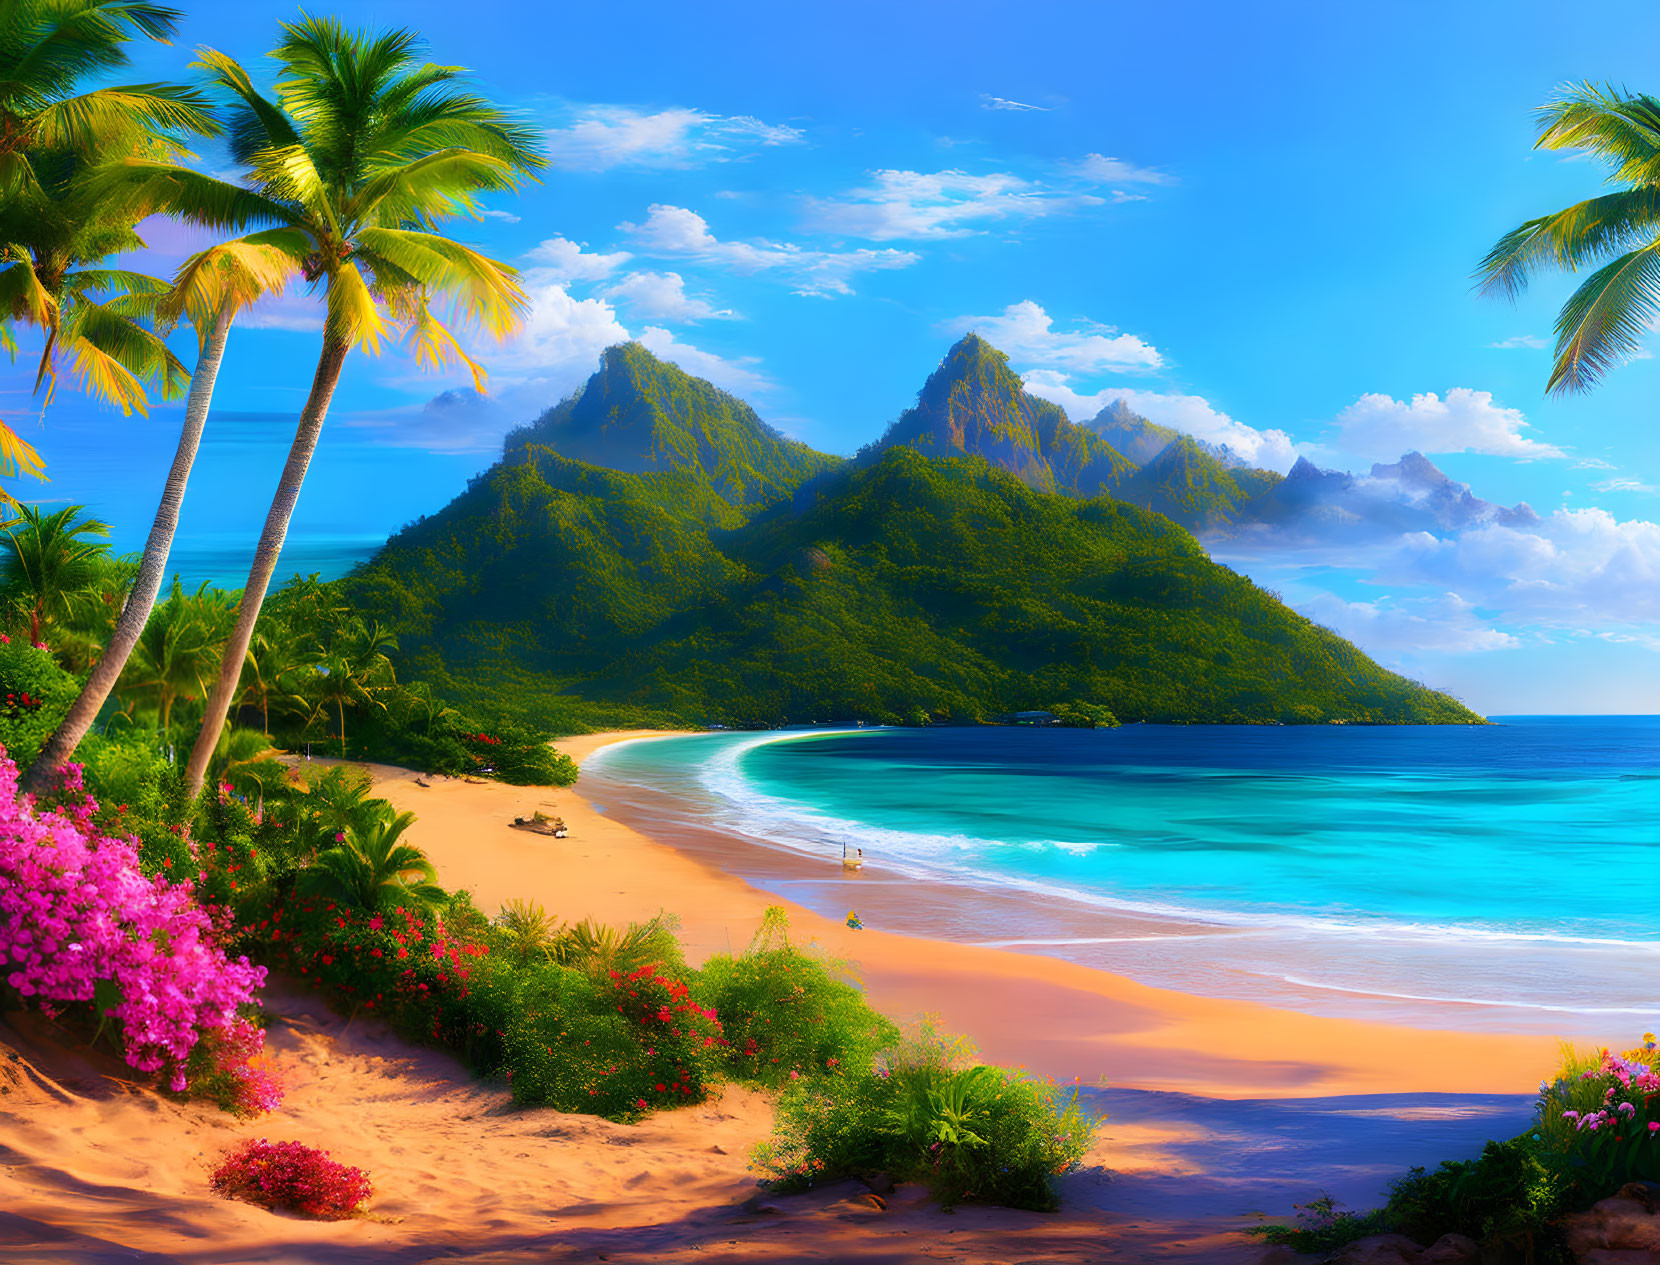 Idyllic Tropical Beach Scene with Palm Trees, Flowers, Sea, Mountains, and Lone Figure